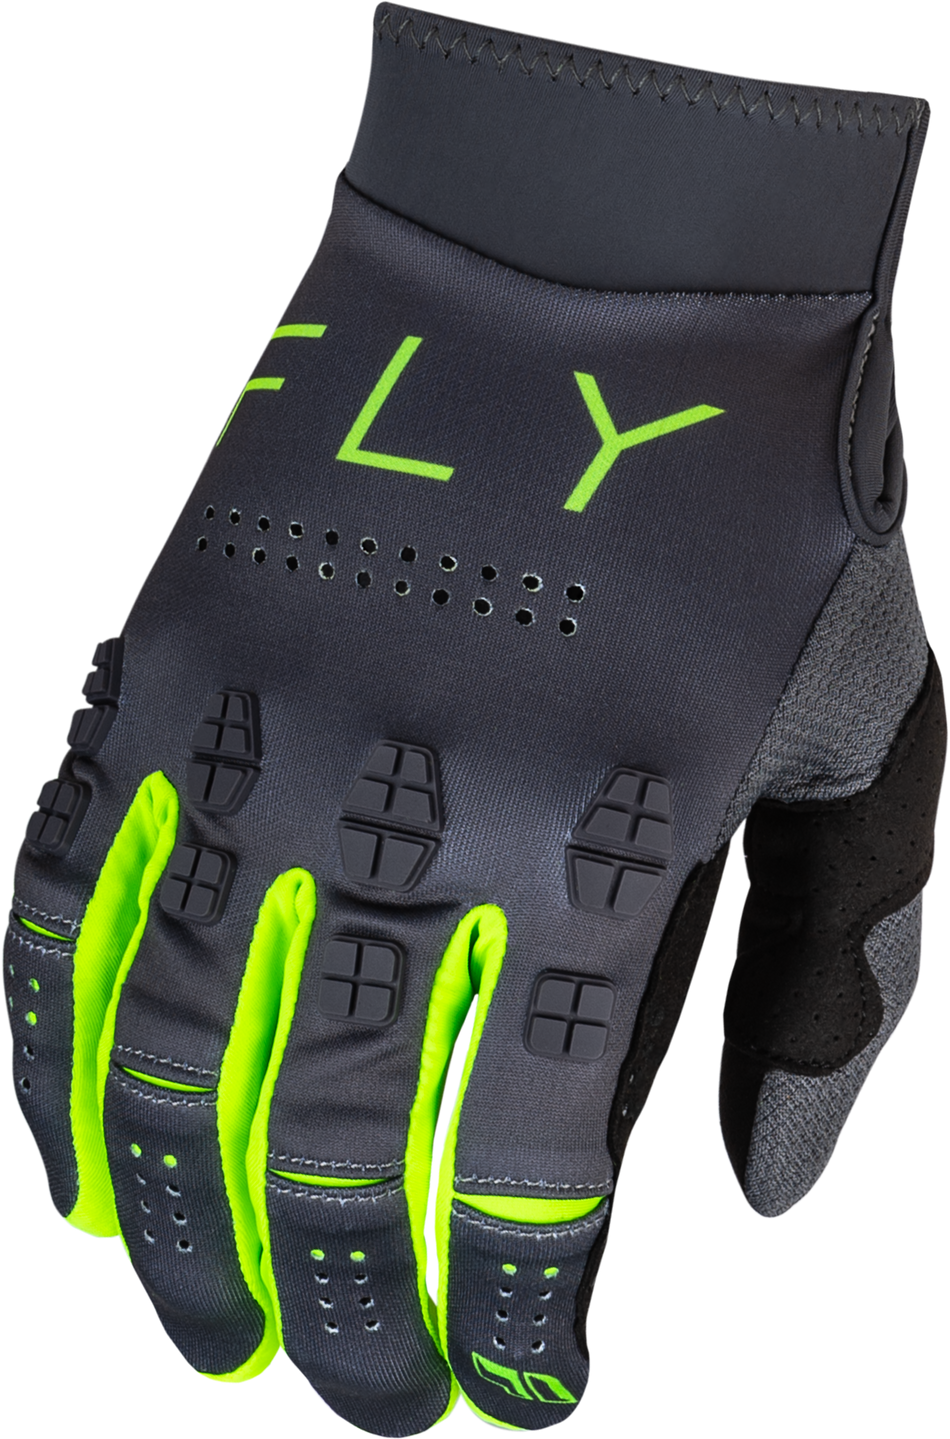 FLY RACING Evolution Dst Gloves Charcoal/Neon Green Sm 377-111S